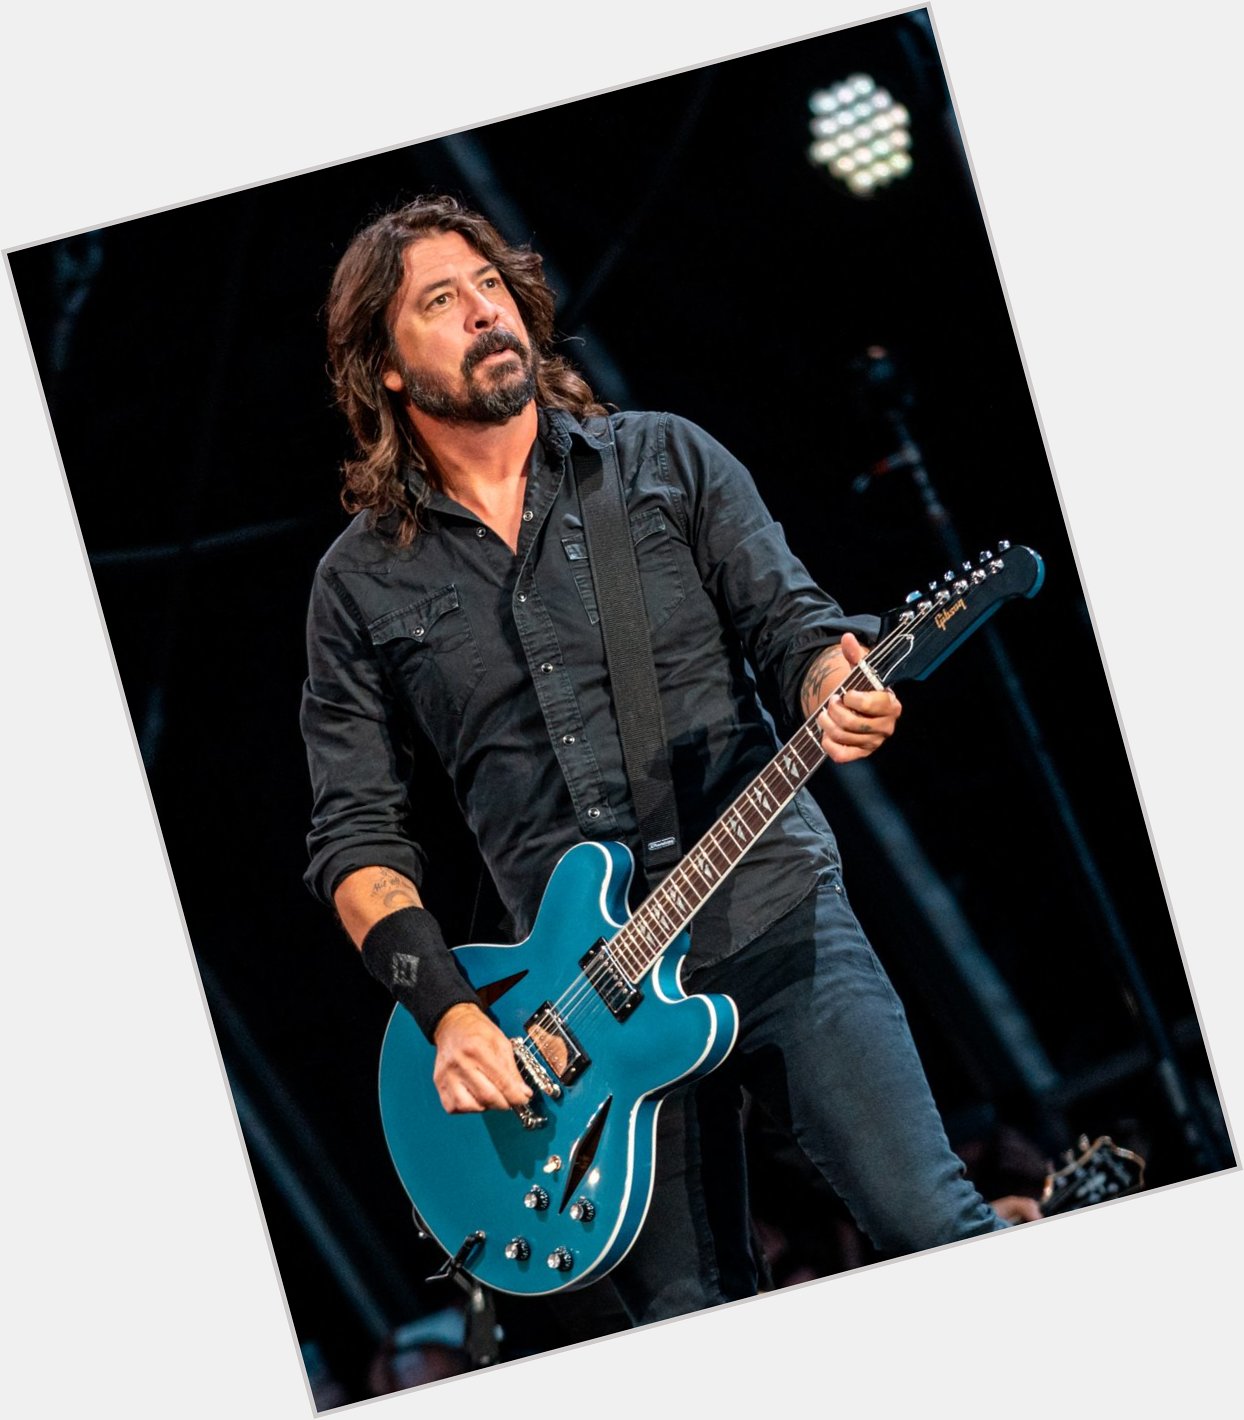 HAPPY BIRTHDAY, DAVE GROHL! We stan you everlong... 